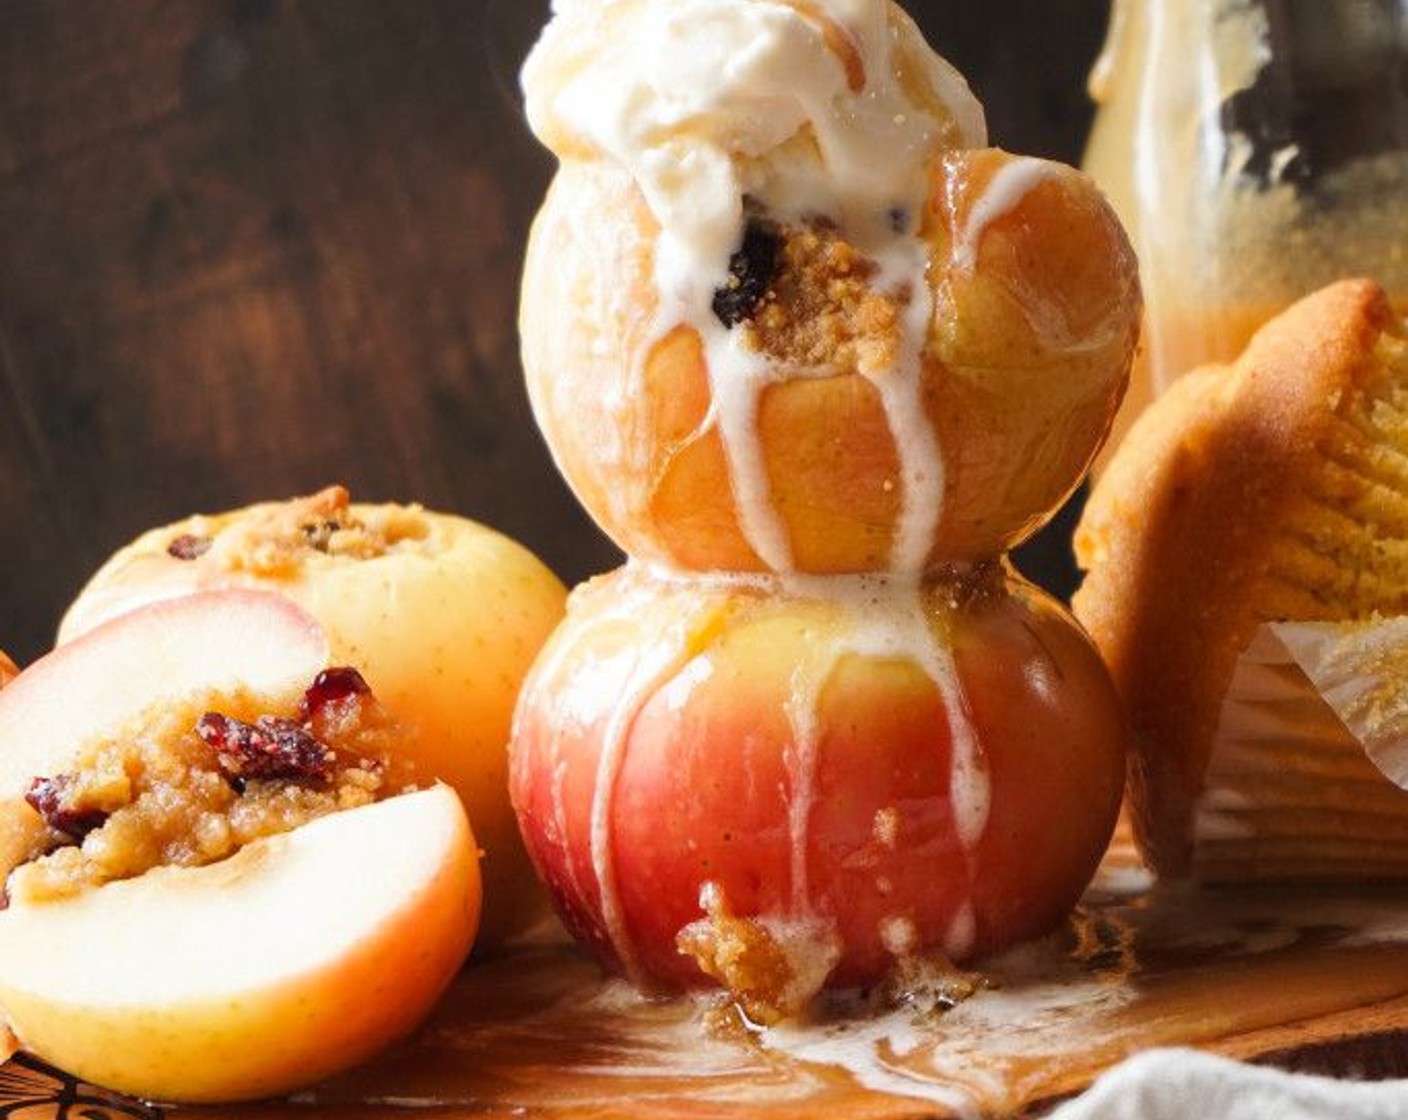 step 10 To serve the apples, cut in half or quarters and top with caramel sauce and ice cream. Enjoy!